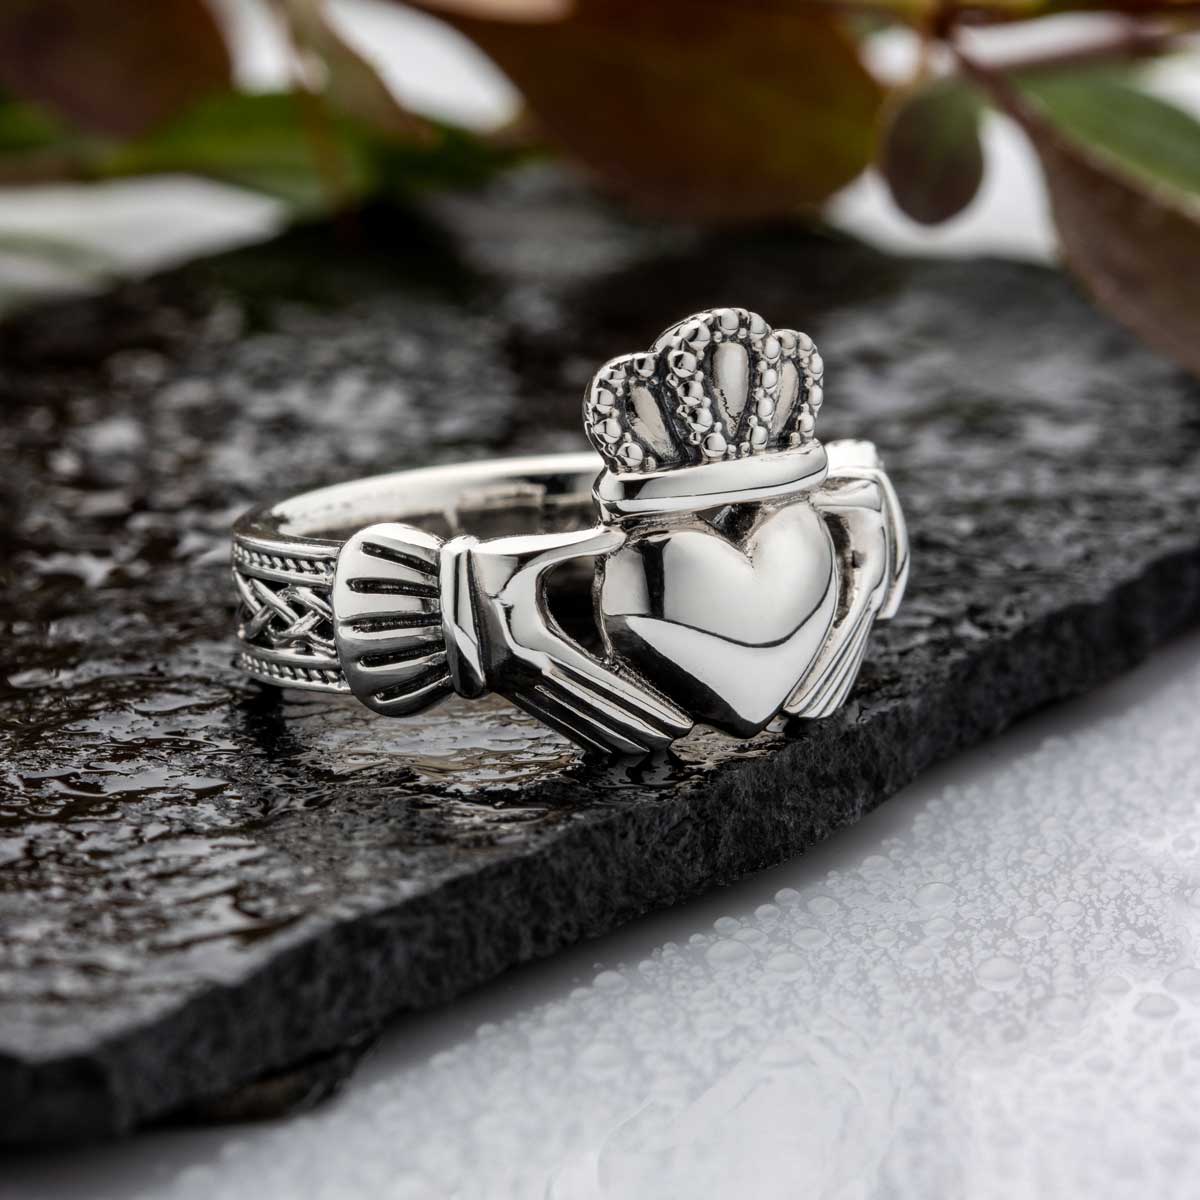 Irish Serch Bythol Ring Sterling Silver Celtic Triquetra Knot Ring  Icovellavna Ring for Girlfriend Wife Everlasting Love - Etsy | Silver  celtic rings, Sterling silver rings, Sterling ring